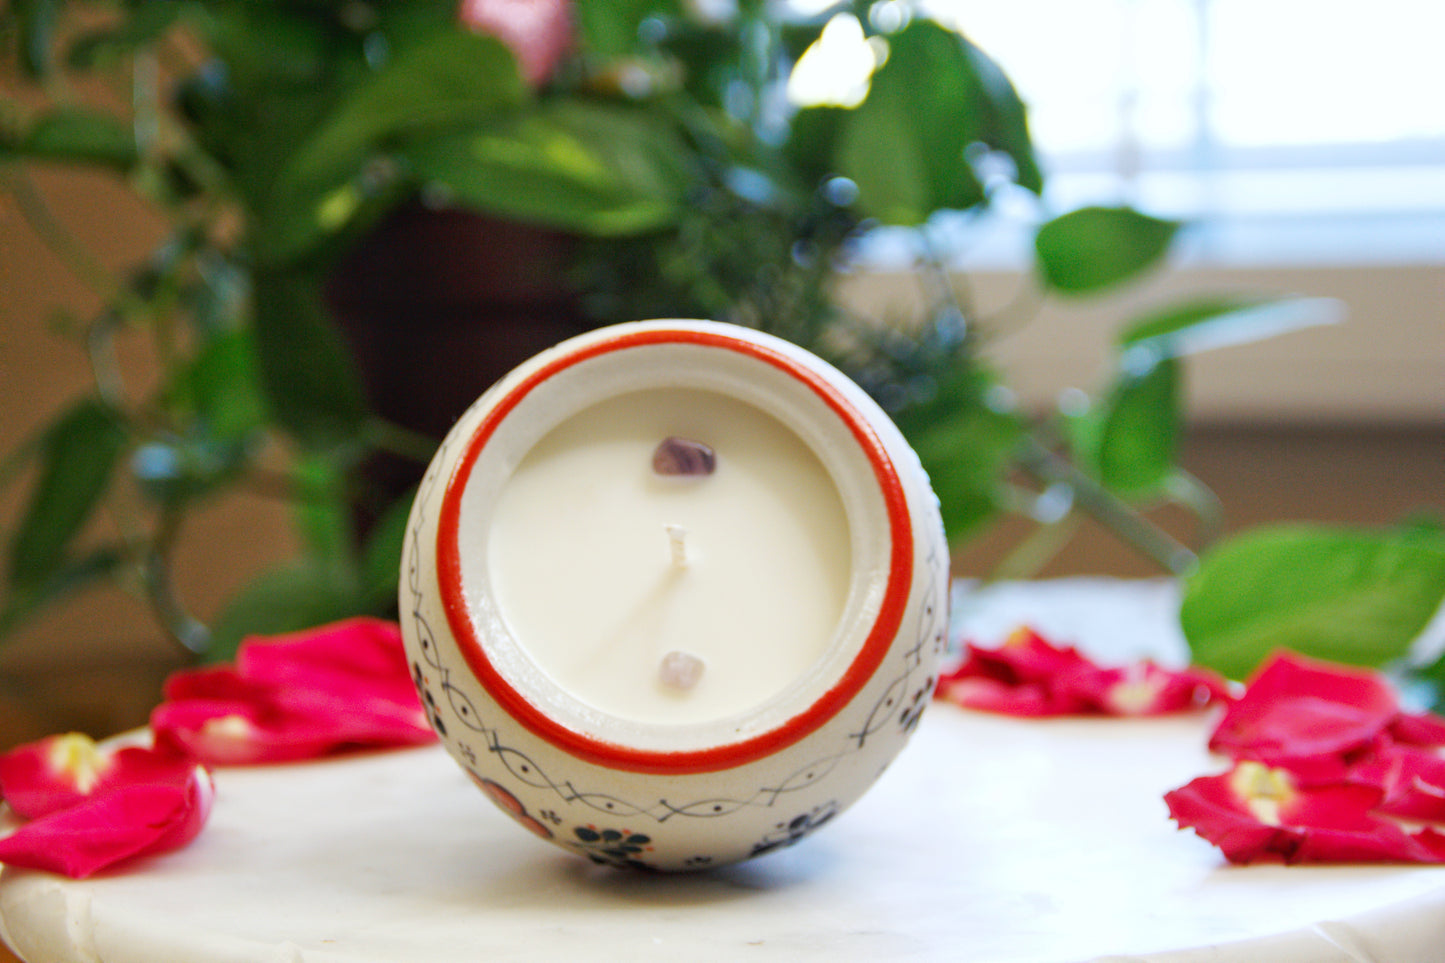 Top view of the handmade artisanal candle in a red floral design talavera. Custom made by Artisan in Mexico. 100% All Natural Soy Candle. Reuse the talavera as home decor or storage.